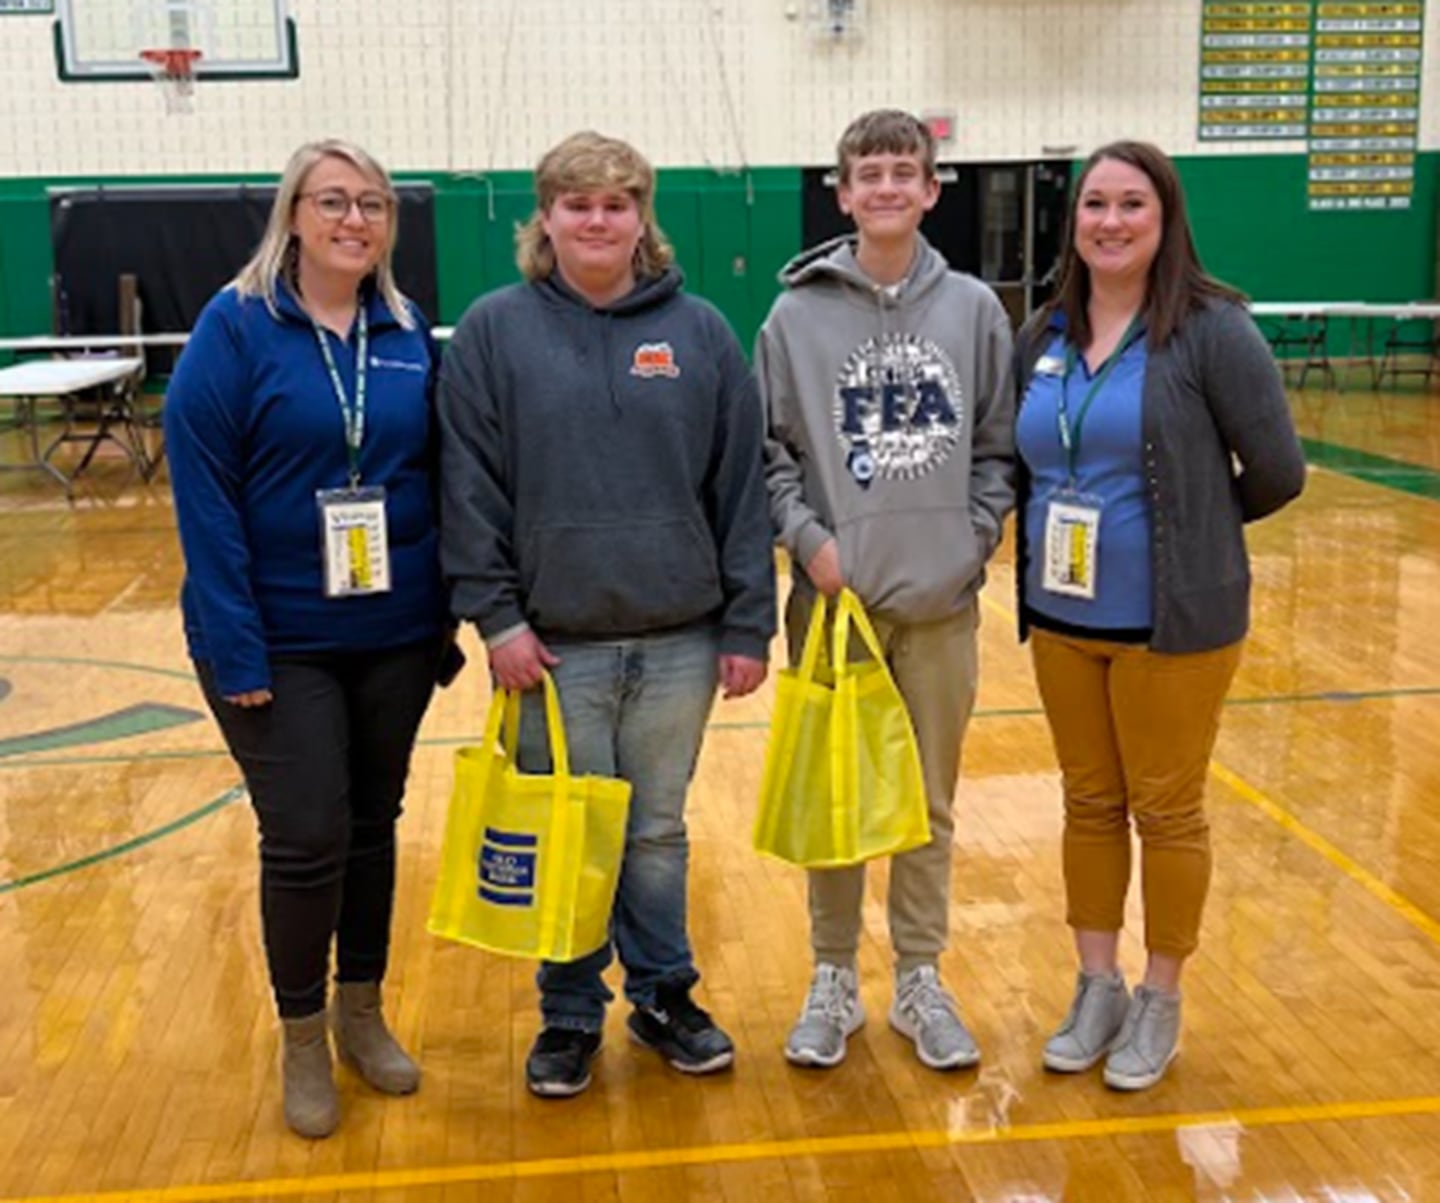 Old National Bank winners during Seneca High School's Reality Store event were Cole Earley, of Seneca, and Brady Haines, of Marseilles.